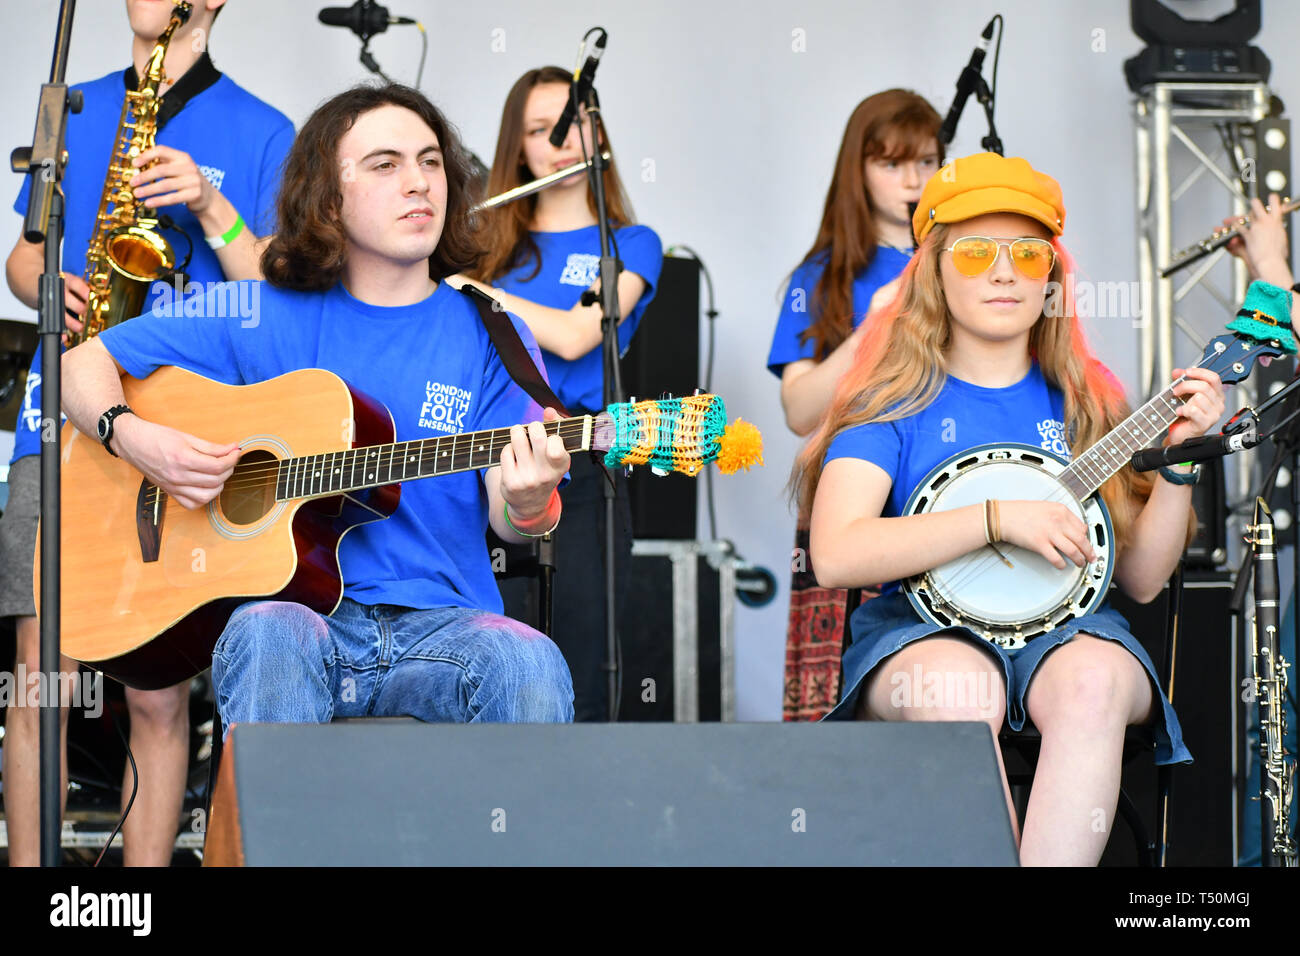 London, UK. 20th April, 2019.London Youth Folk Ensemble attend the Feast of St George to celebrate English culture with music and English food stalls in Trafalgar Square on 20 April 2019, London, UK. Credit: Picture Capital/Alamy Live News Stock Photo